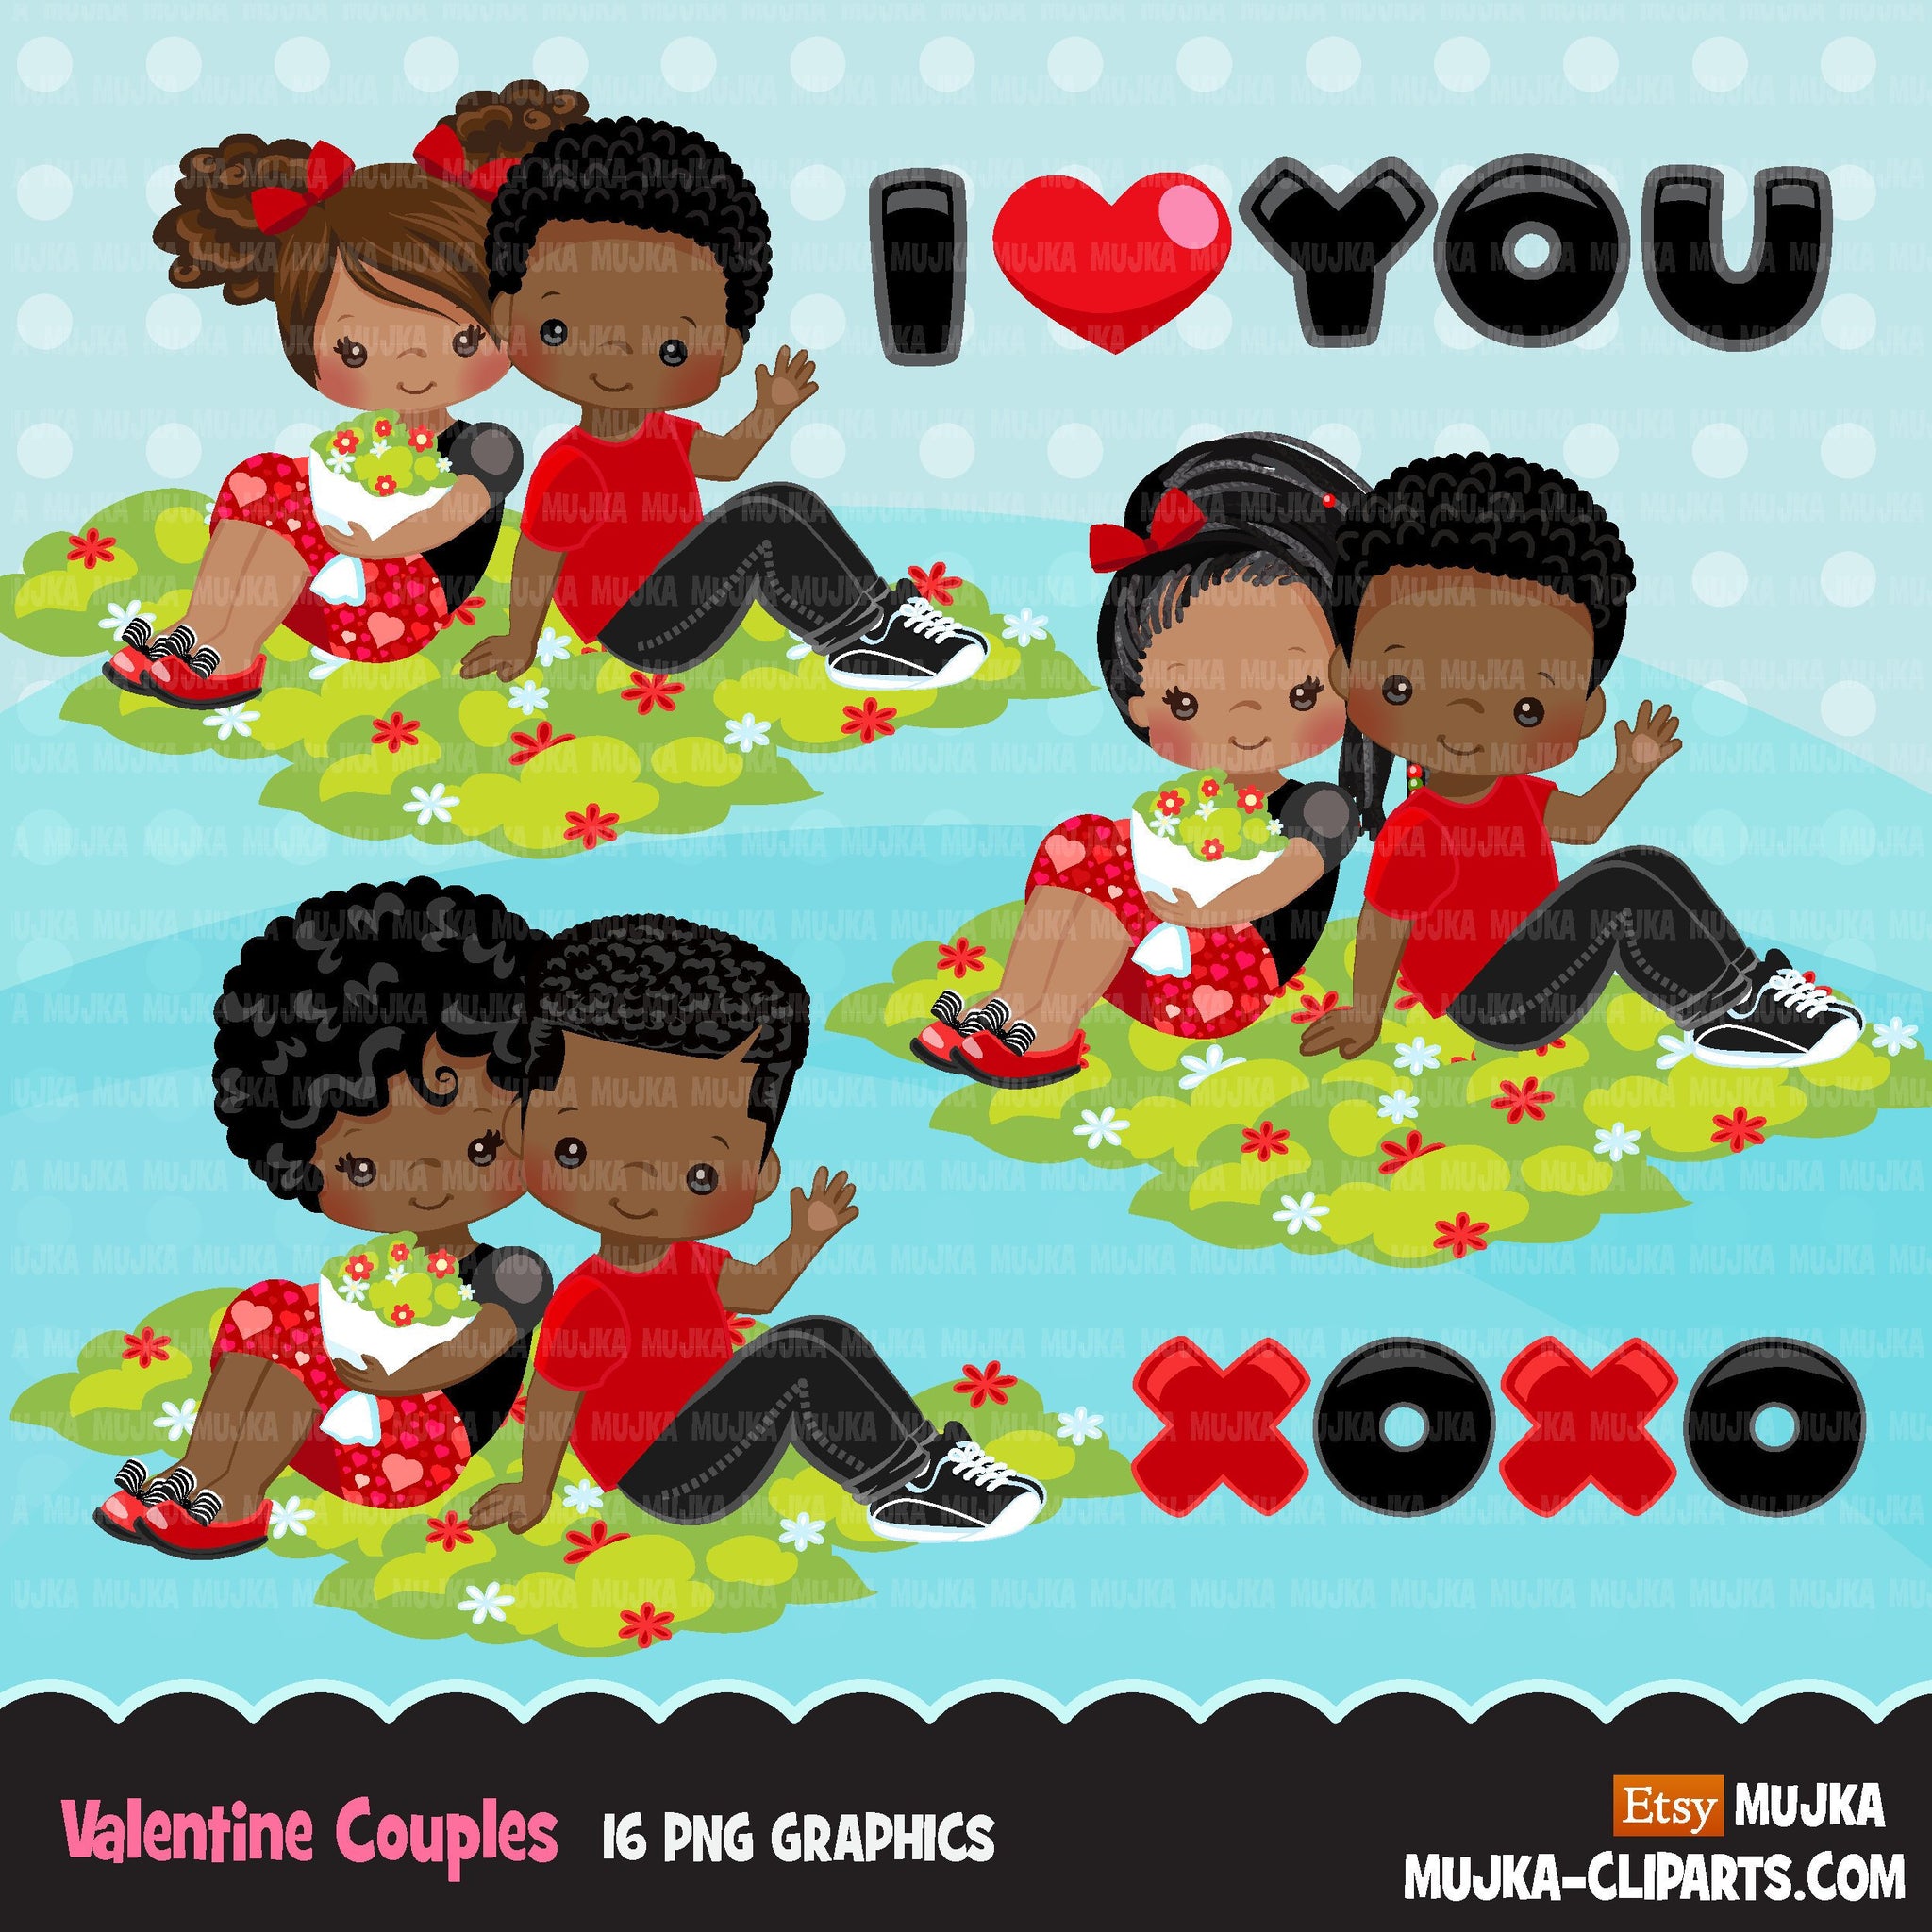 Valentine's Day Clipart, Cute Valentine black kids, couples sitting, XOXO valentine graphics, commercial use clip art